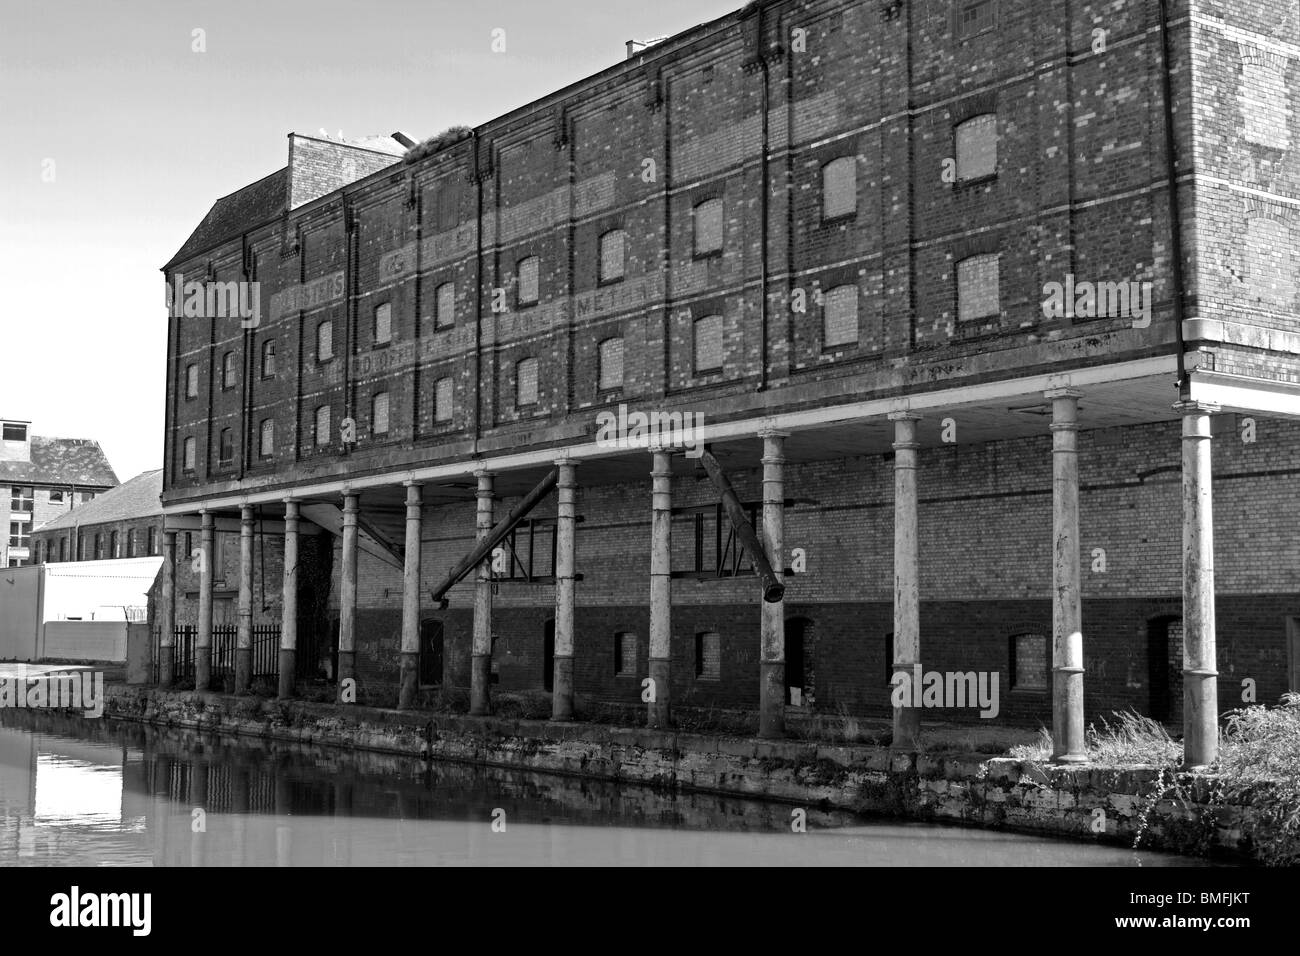 Gloucester Historic Docks, warehouses waiting for regeneration projects Stock Photo